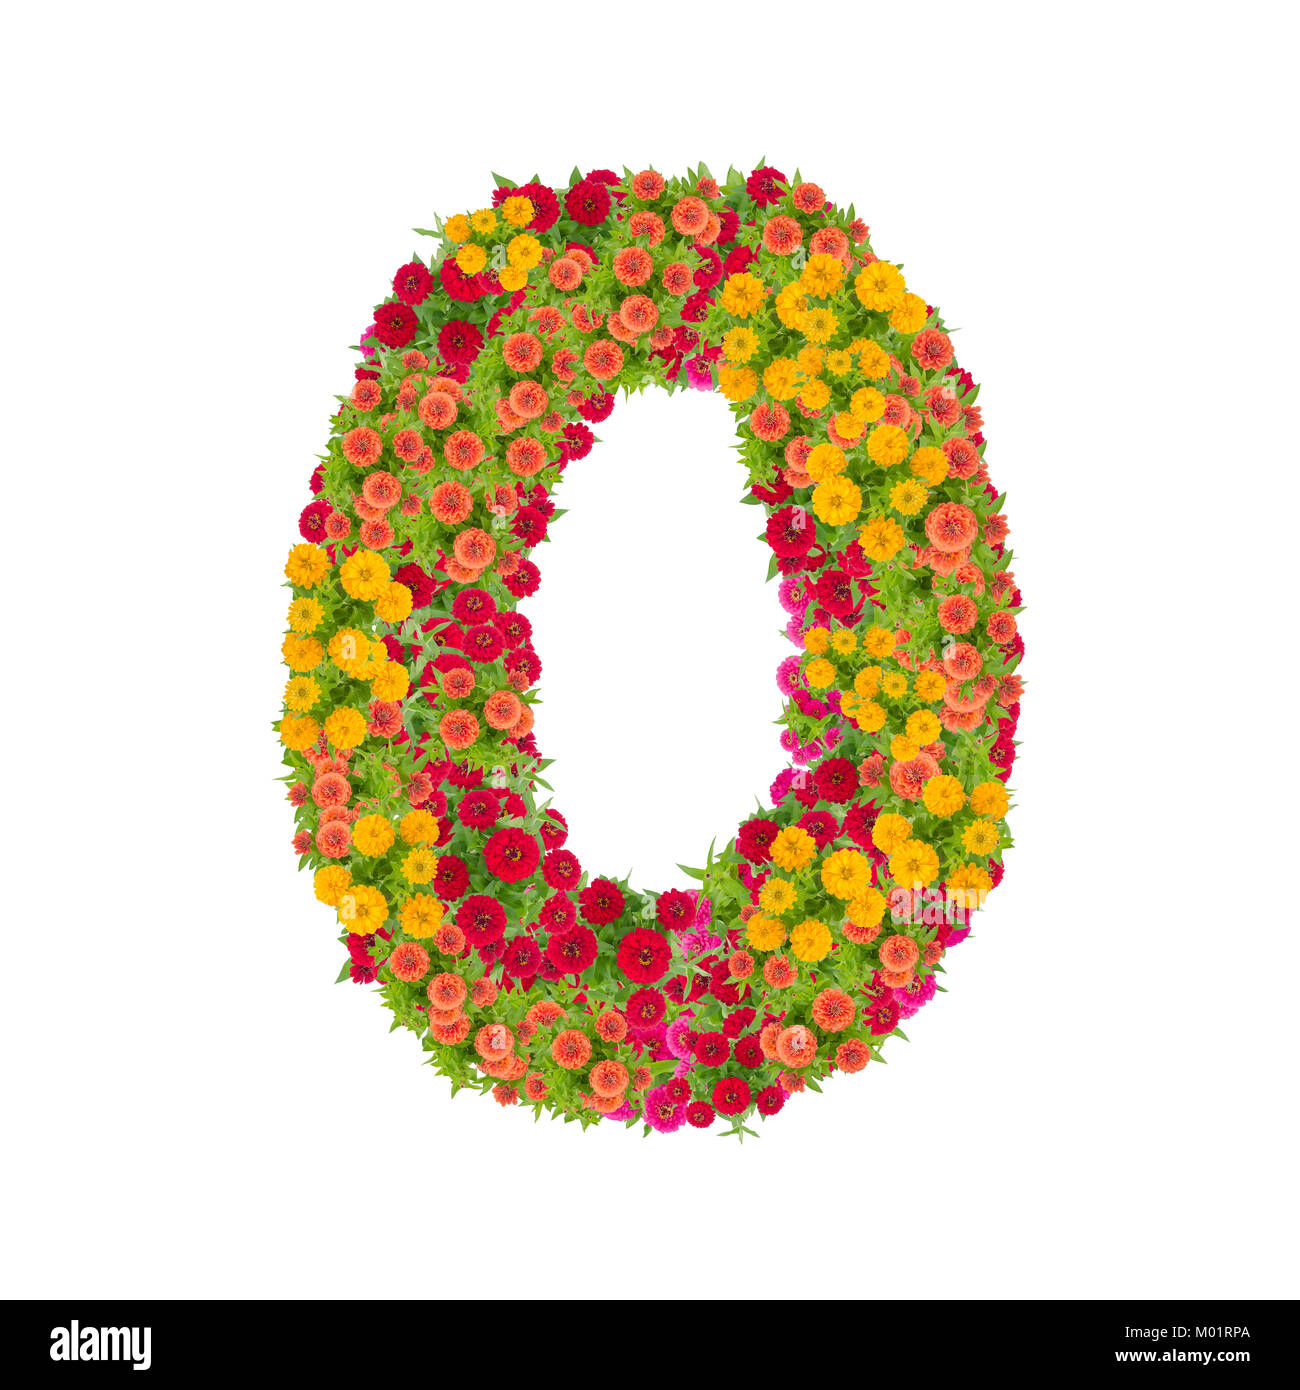 number 0 made from Zinnias flowers isolated on white background.Colorful zinnia flower put together in number zero shape with clipping path Stock Photo